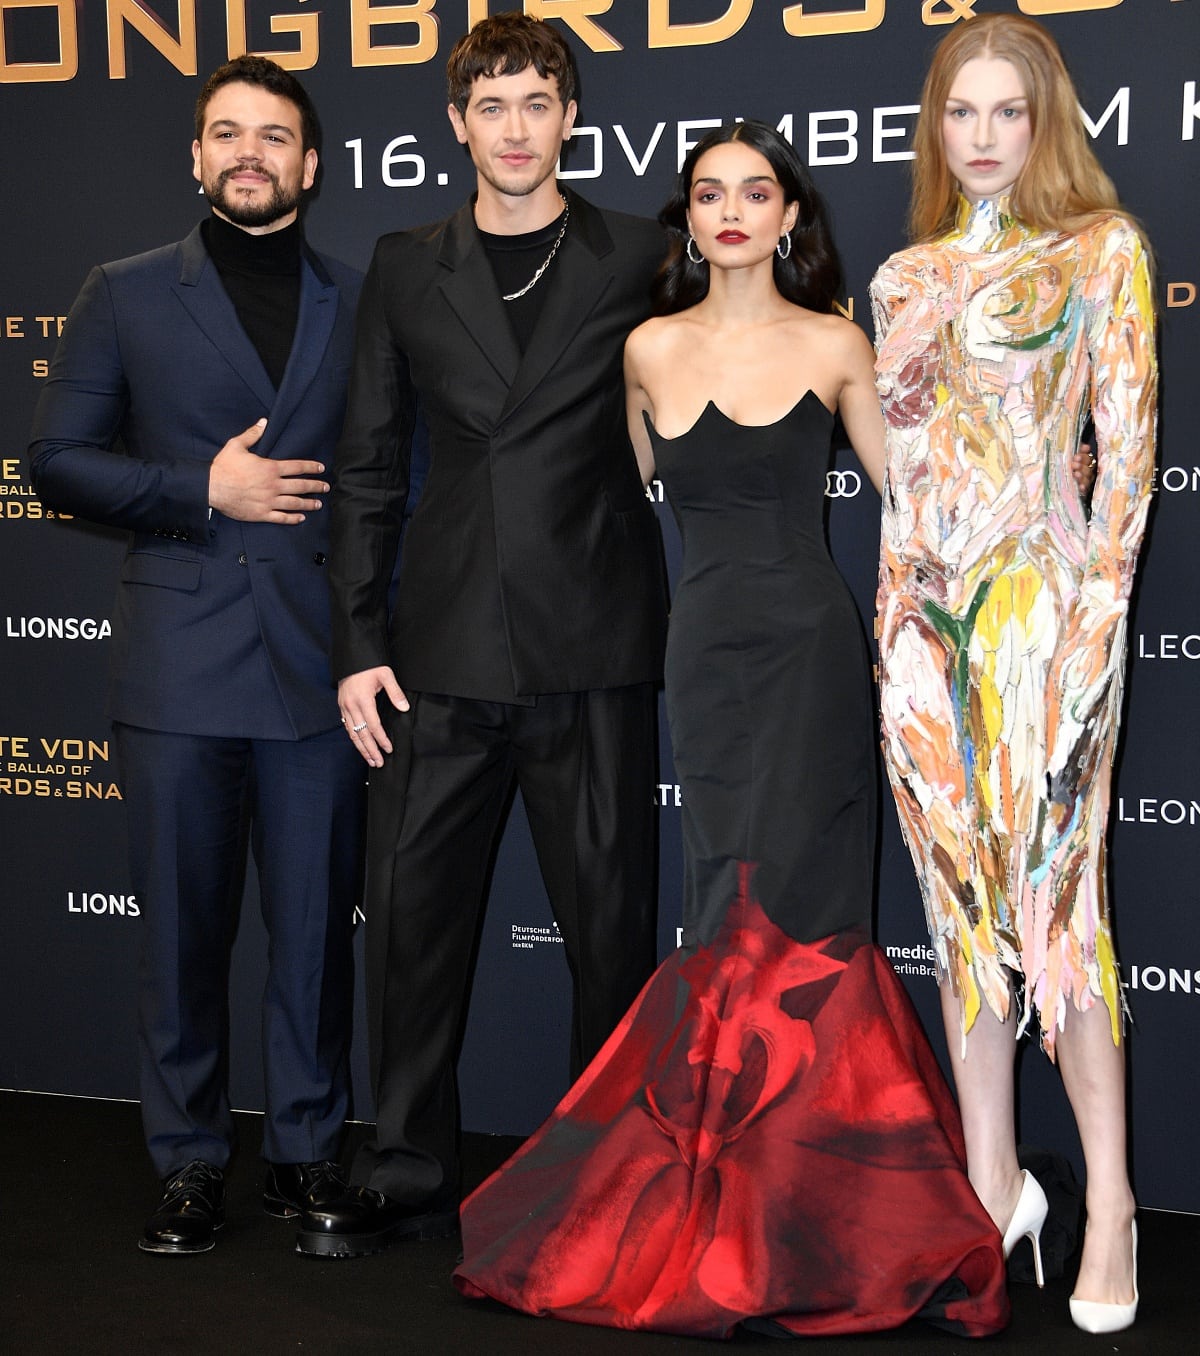 Josh Andres Rivera, Tom Blyth, Rachel Zegler, and Hunter Schafer making a striking entrance at the premiere of The Hunger Games: The Ballad of Songbirds and Snakes in Berlin